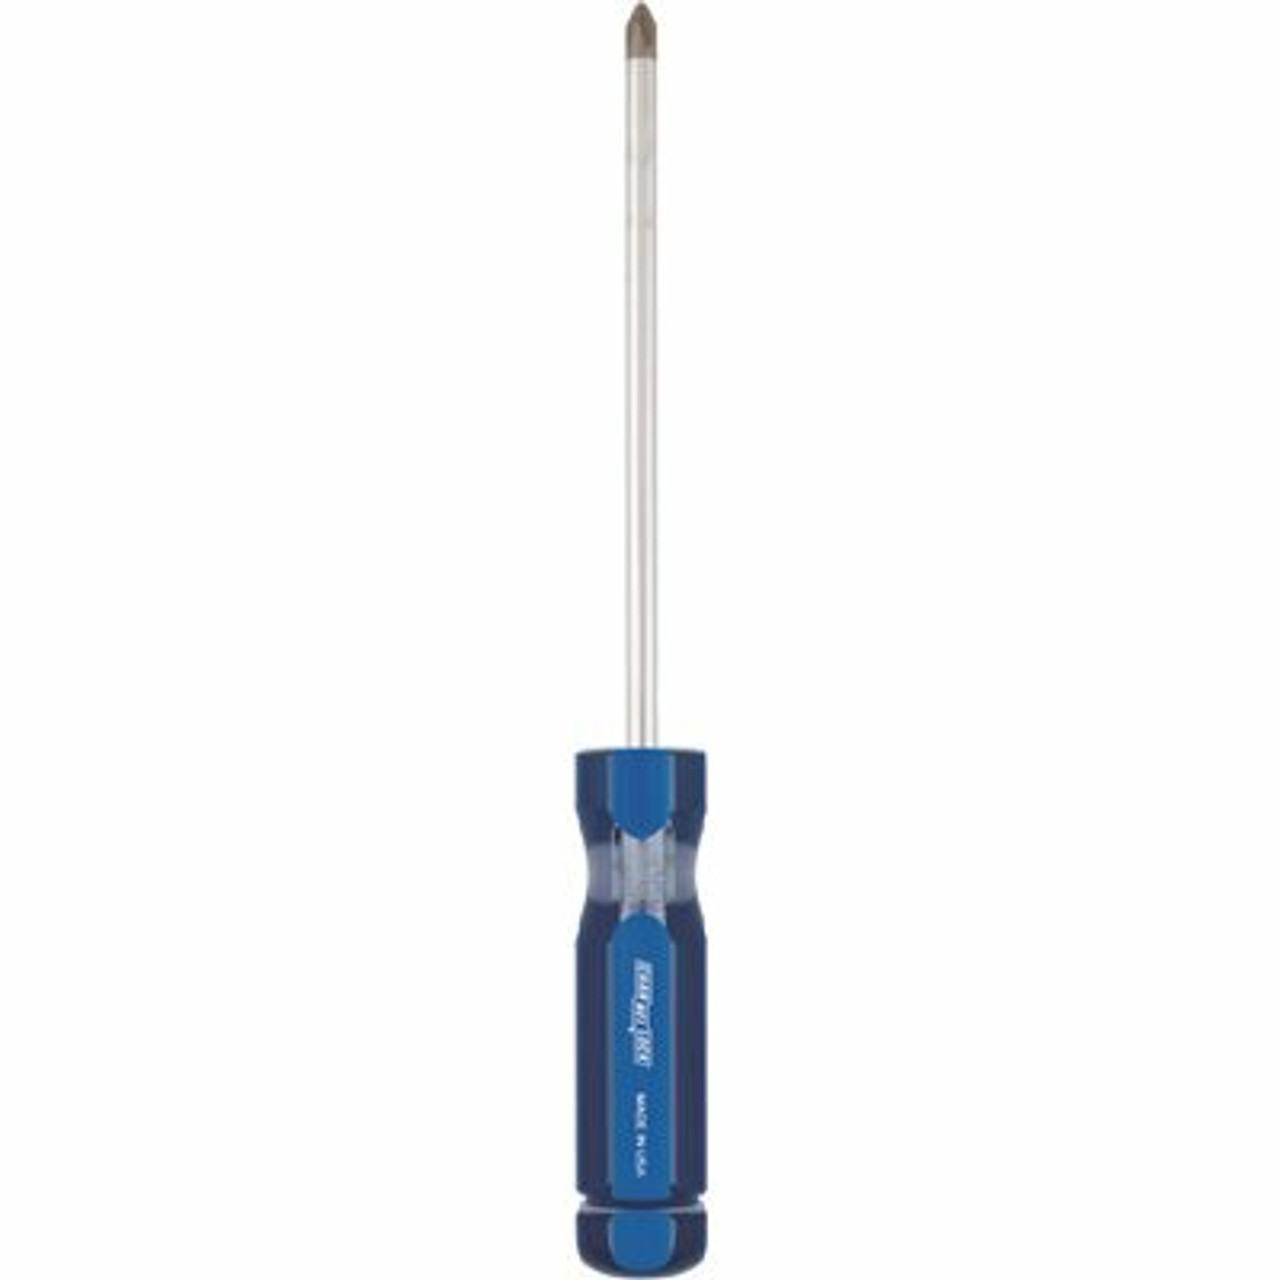 Channellock No. 2 Acetate Handle Phillips Head Screwdriver With 6 In. Shaft